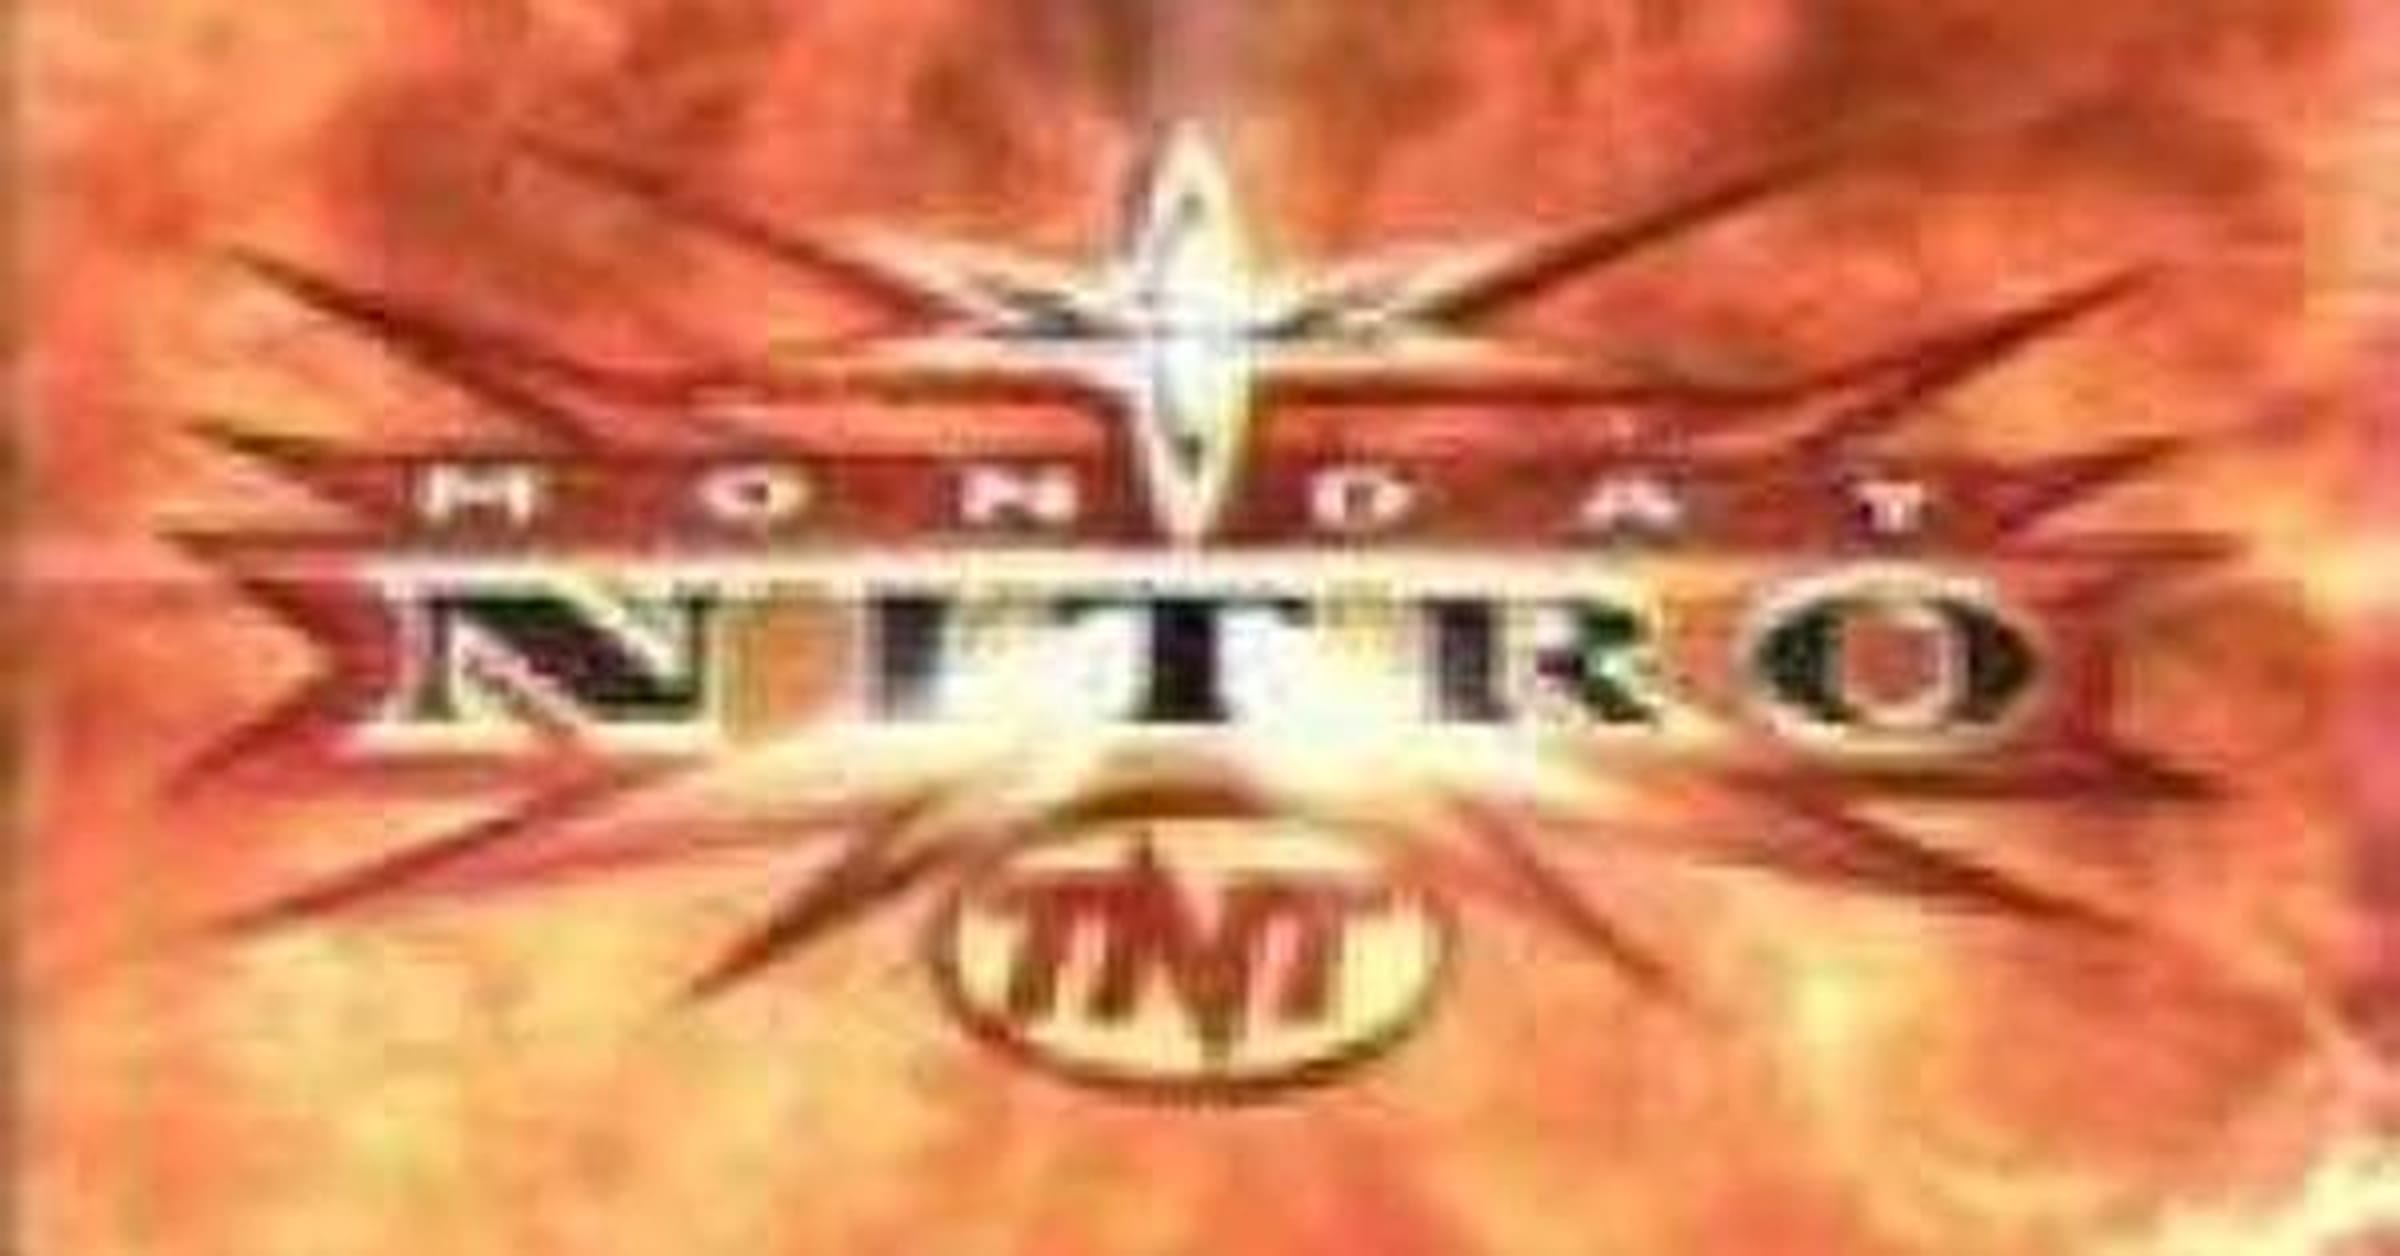 The Best and Worst of WCW Monday Nitro for December 21, 1998